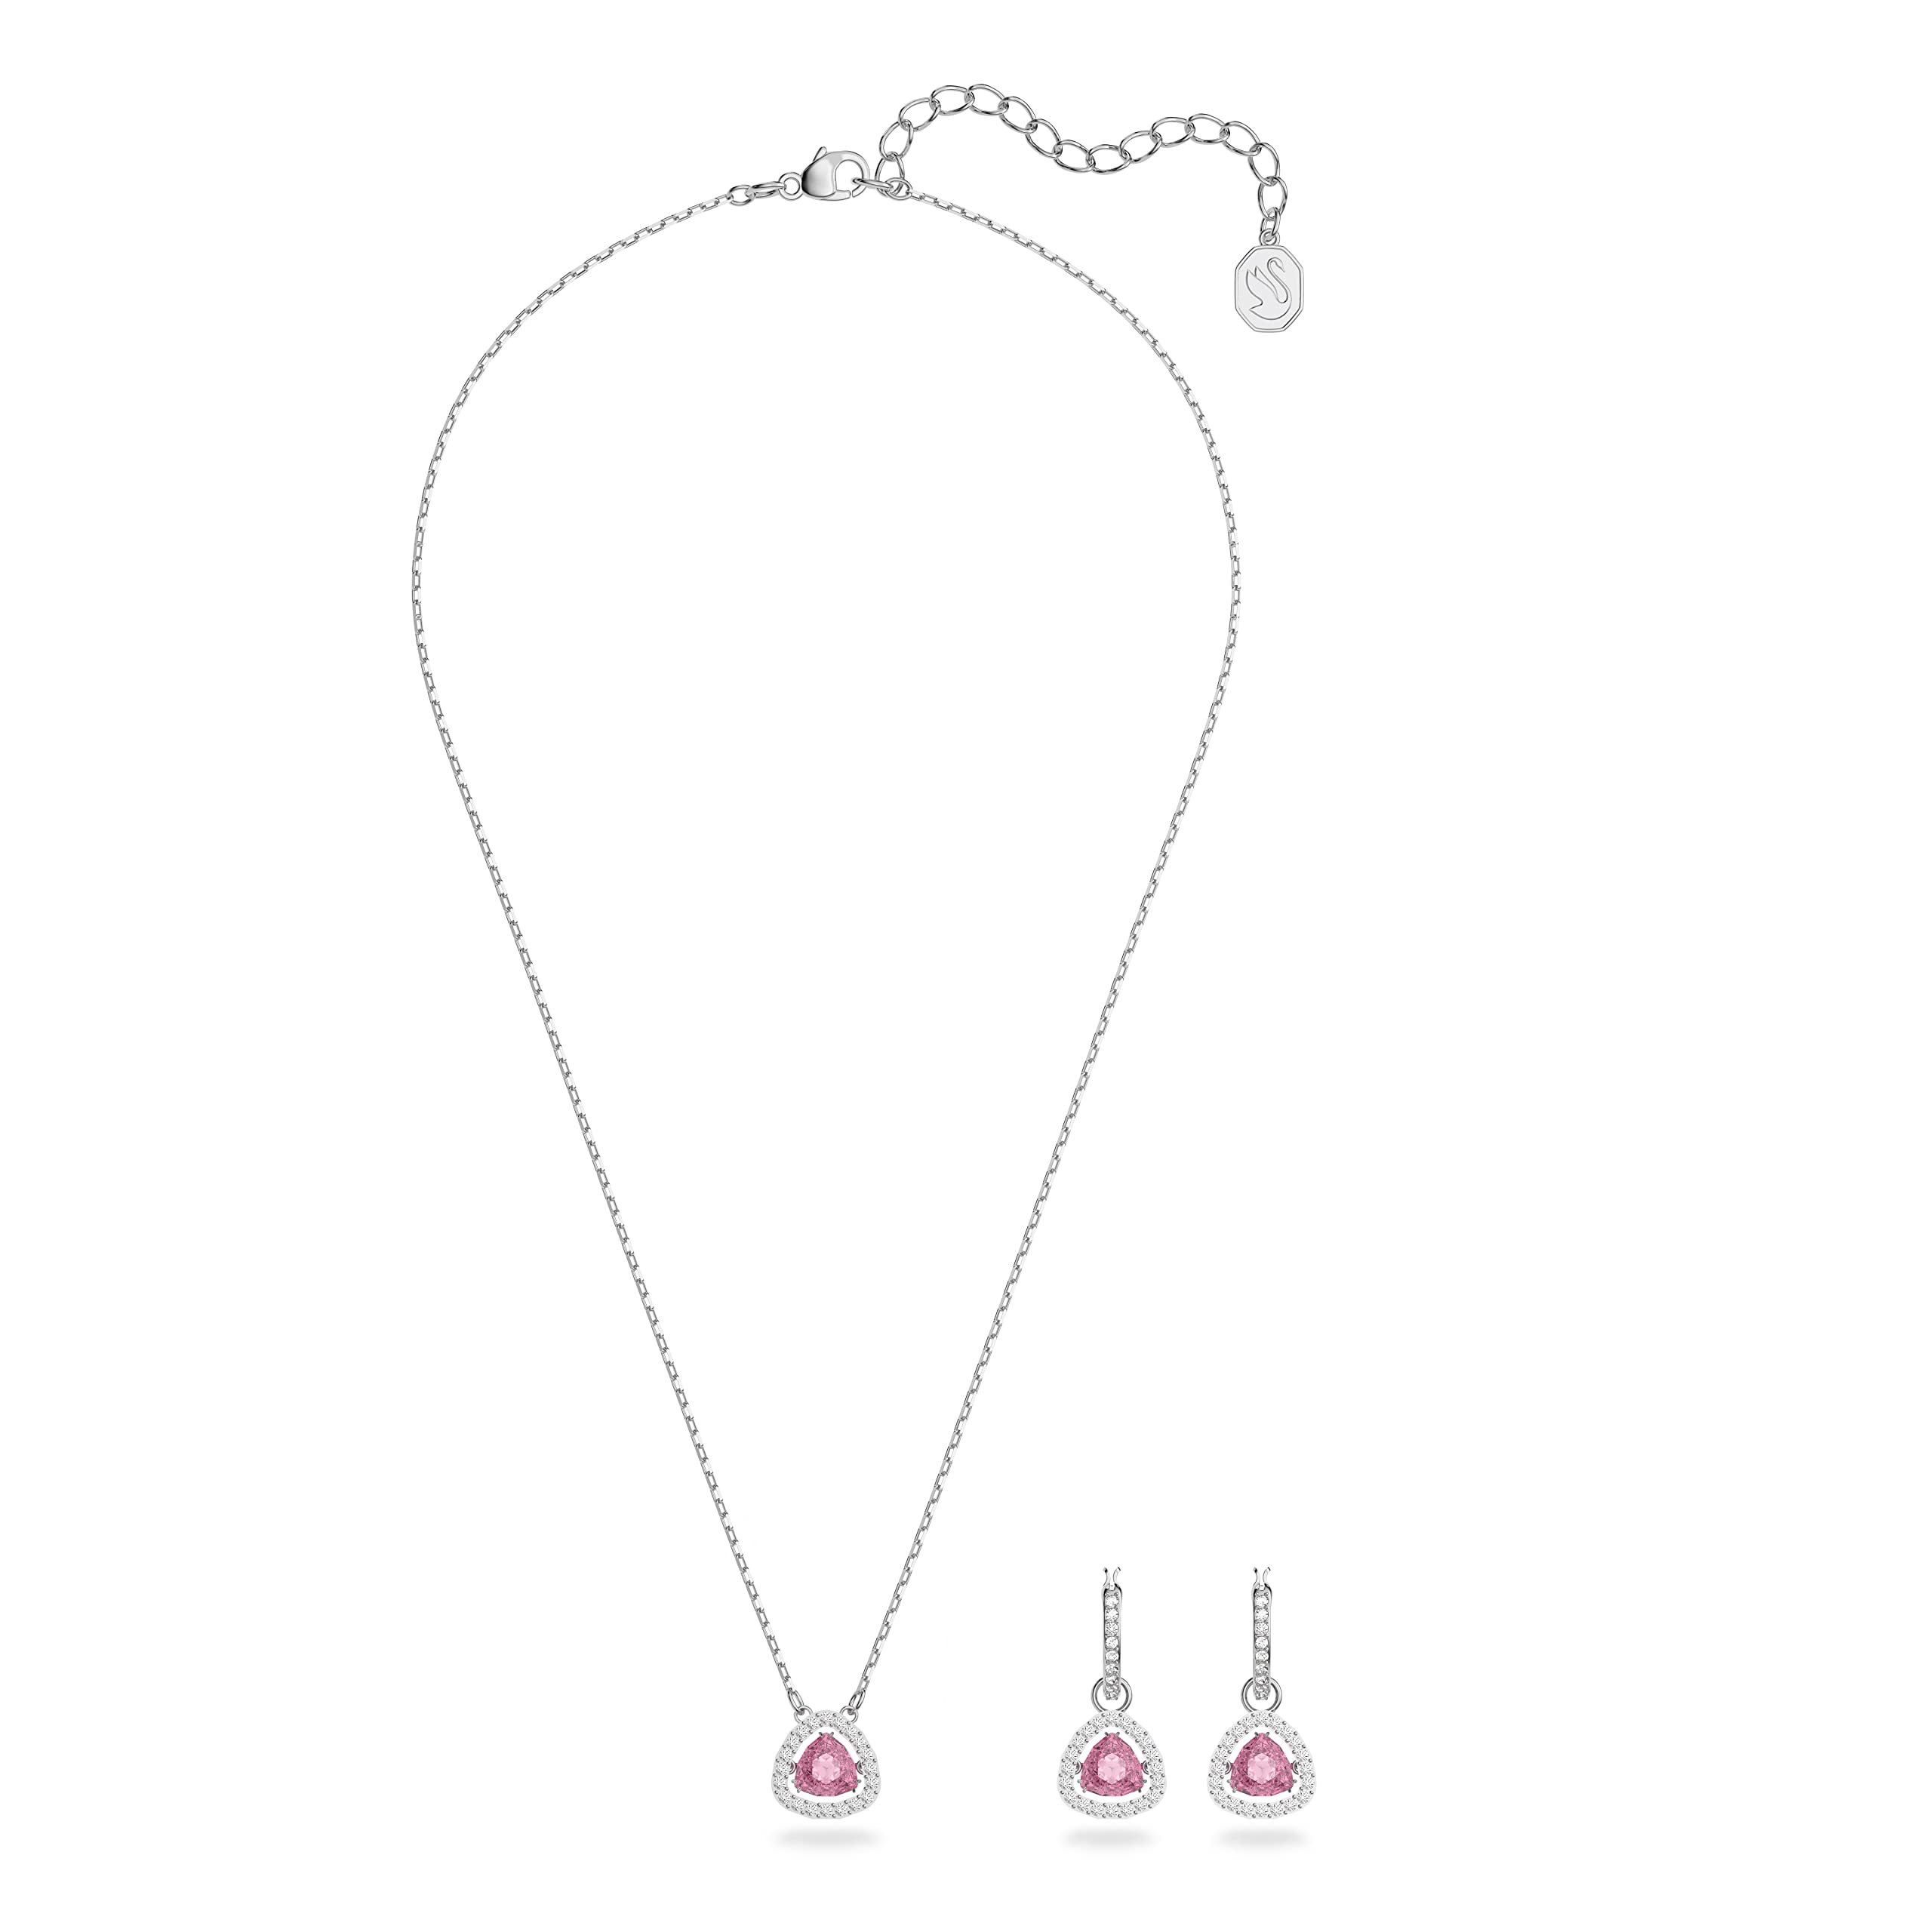 SWAROVSKI Millenia Crystal Jewelry Set Collection, Pink and Rose-Gold Crystals